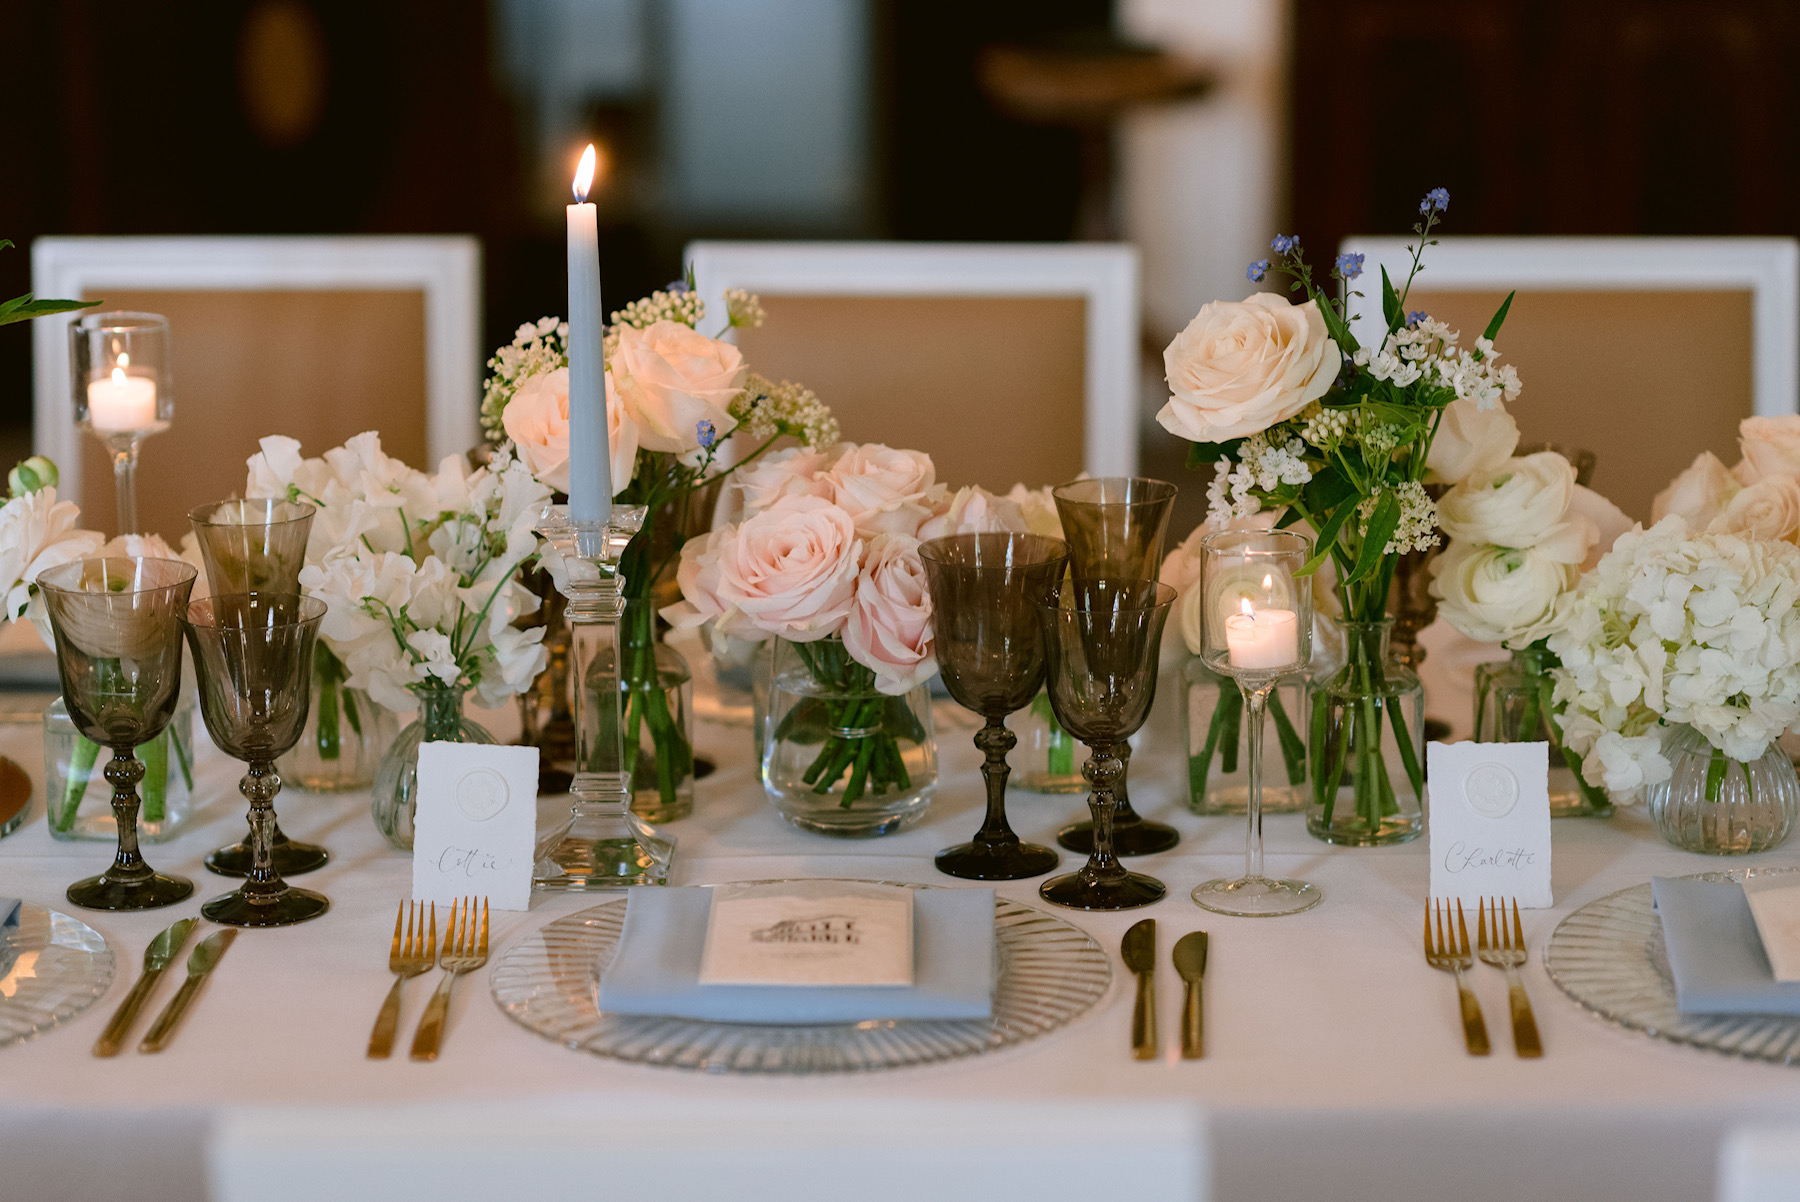 Wedding flowers and beautiful table display